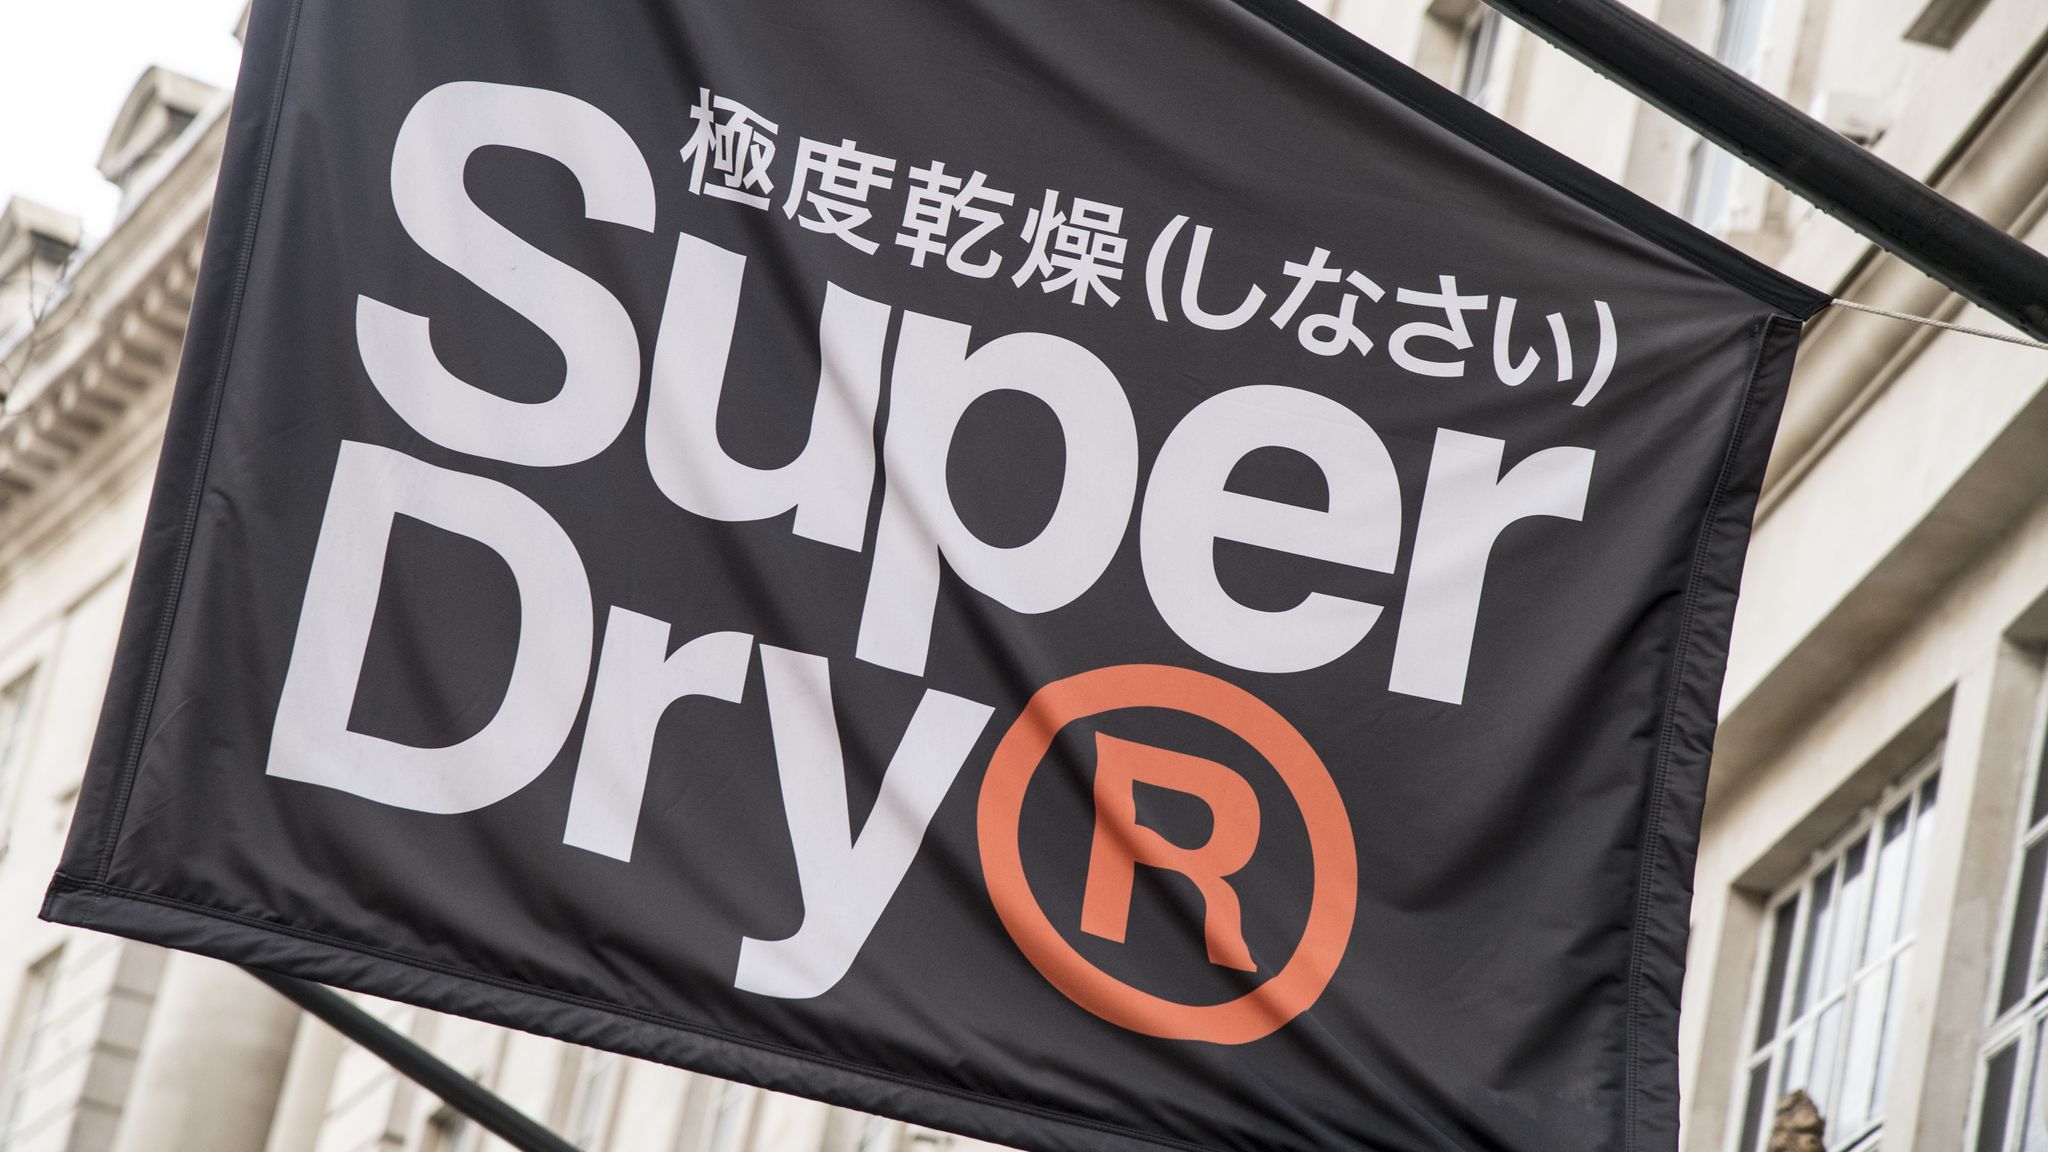 Superdry is a UK Branded Clothing Company Editorial Stock Image